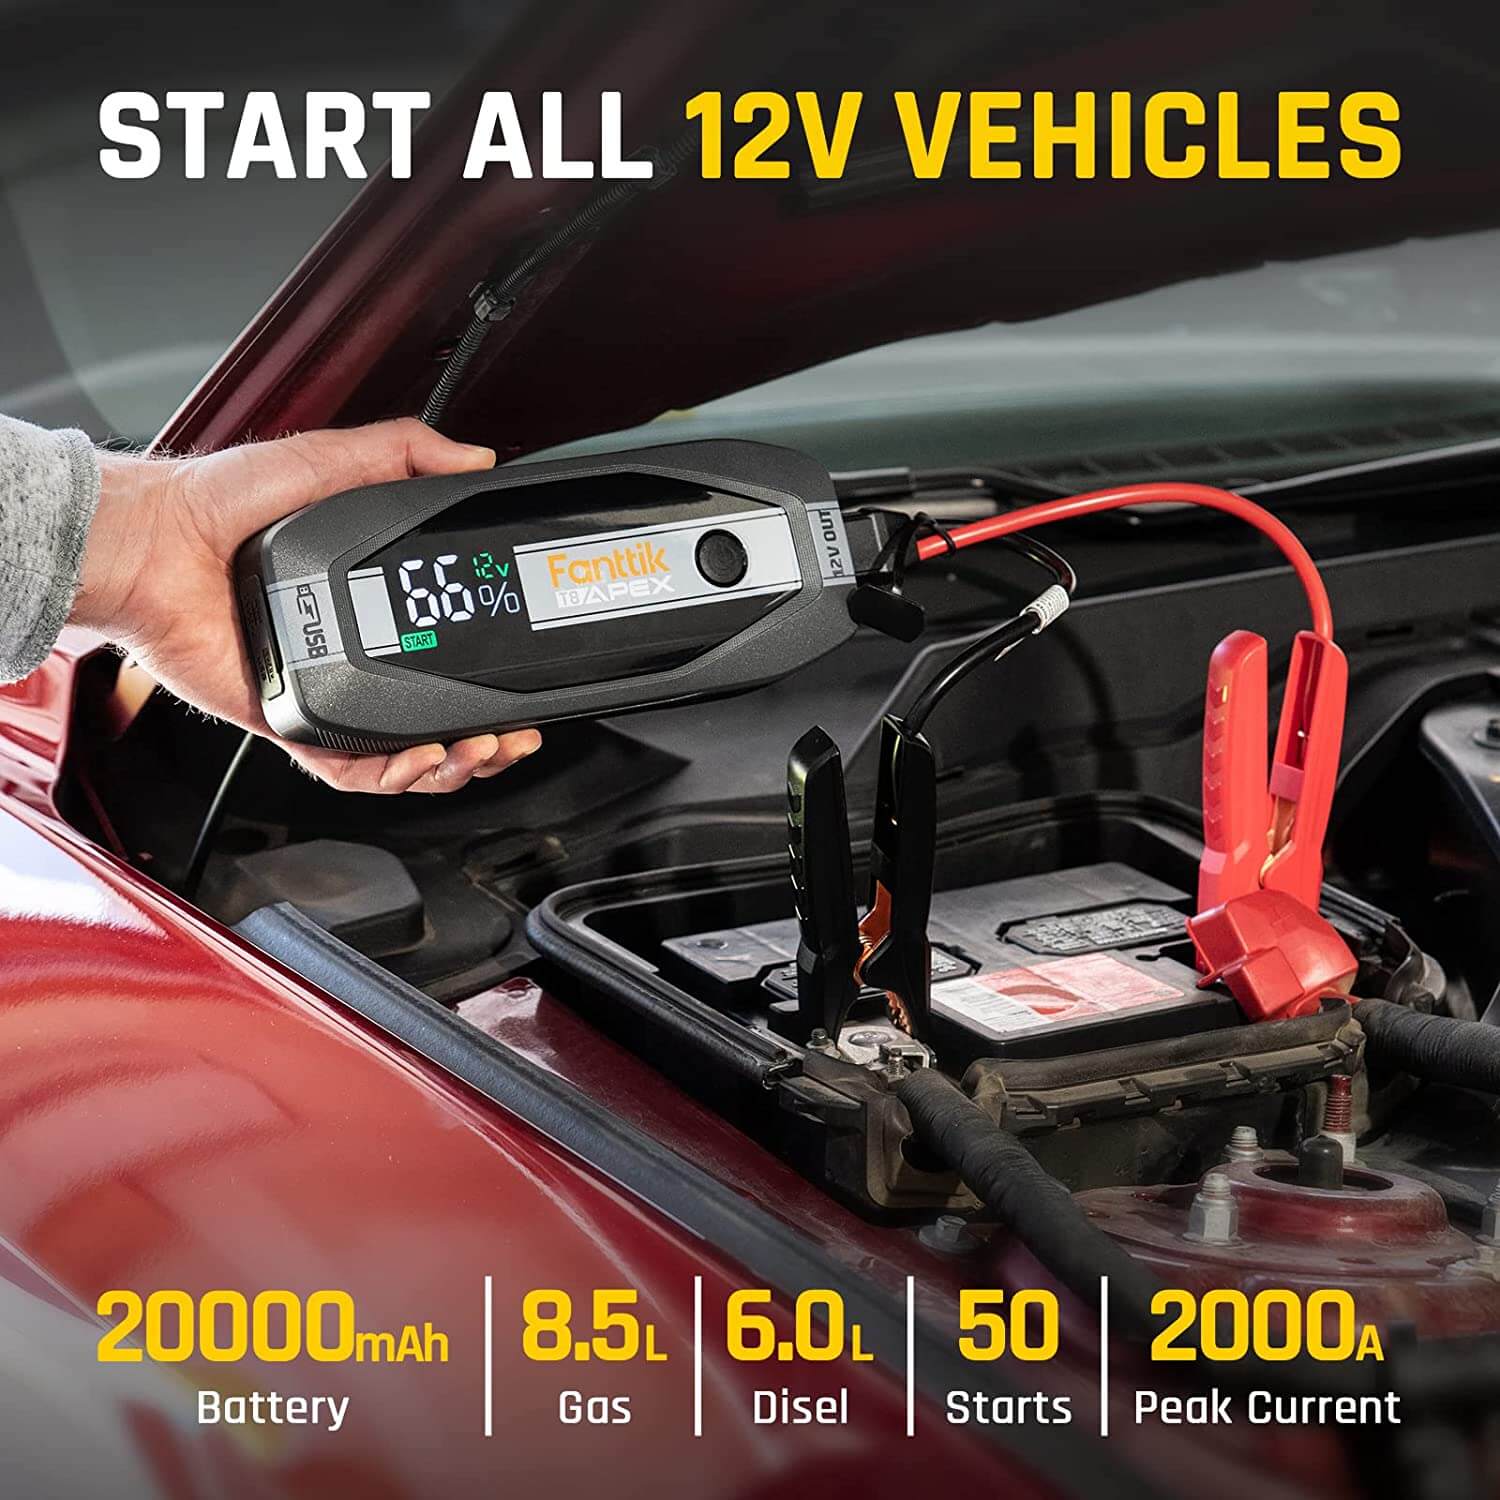  Car Jump Starter, 20000mAh 1500A Peak Battry Jump Starter for  up to 6L Gas or 3L Diesel Engine,Portable Power Bank Charger with Type-C  Fast Charging, Smart Safety Jumper Cable, LED Light